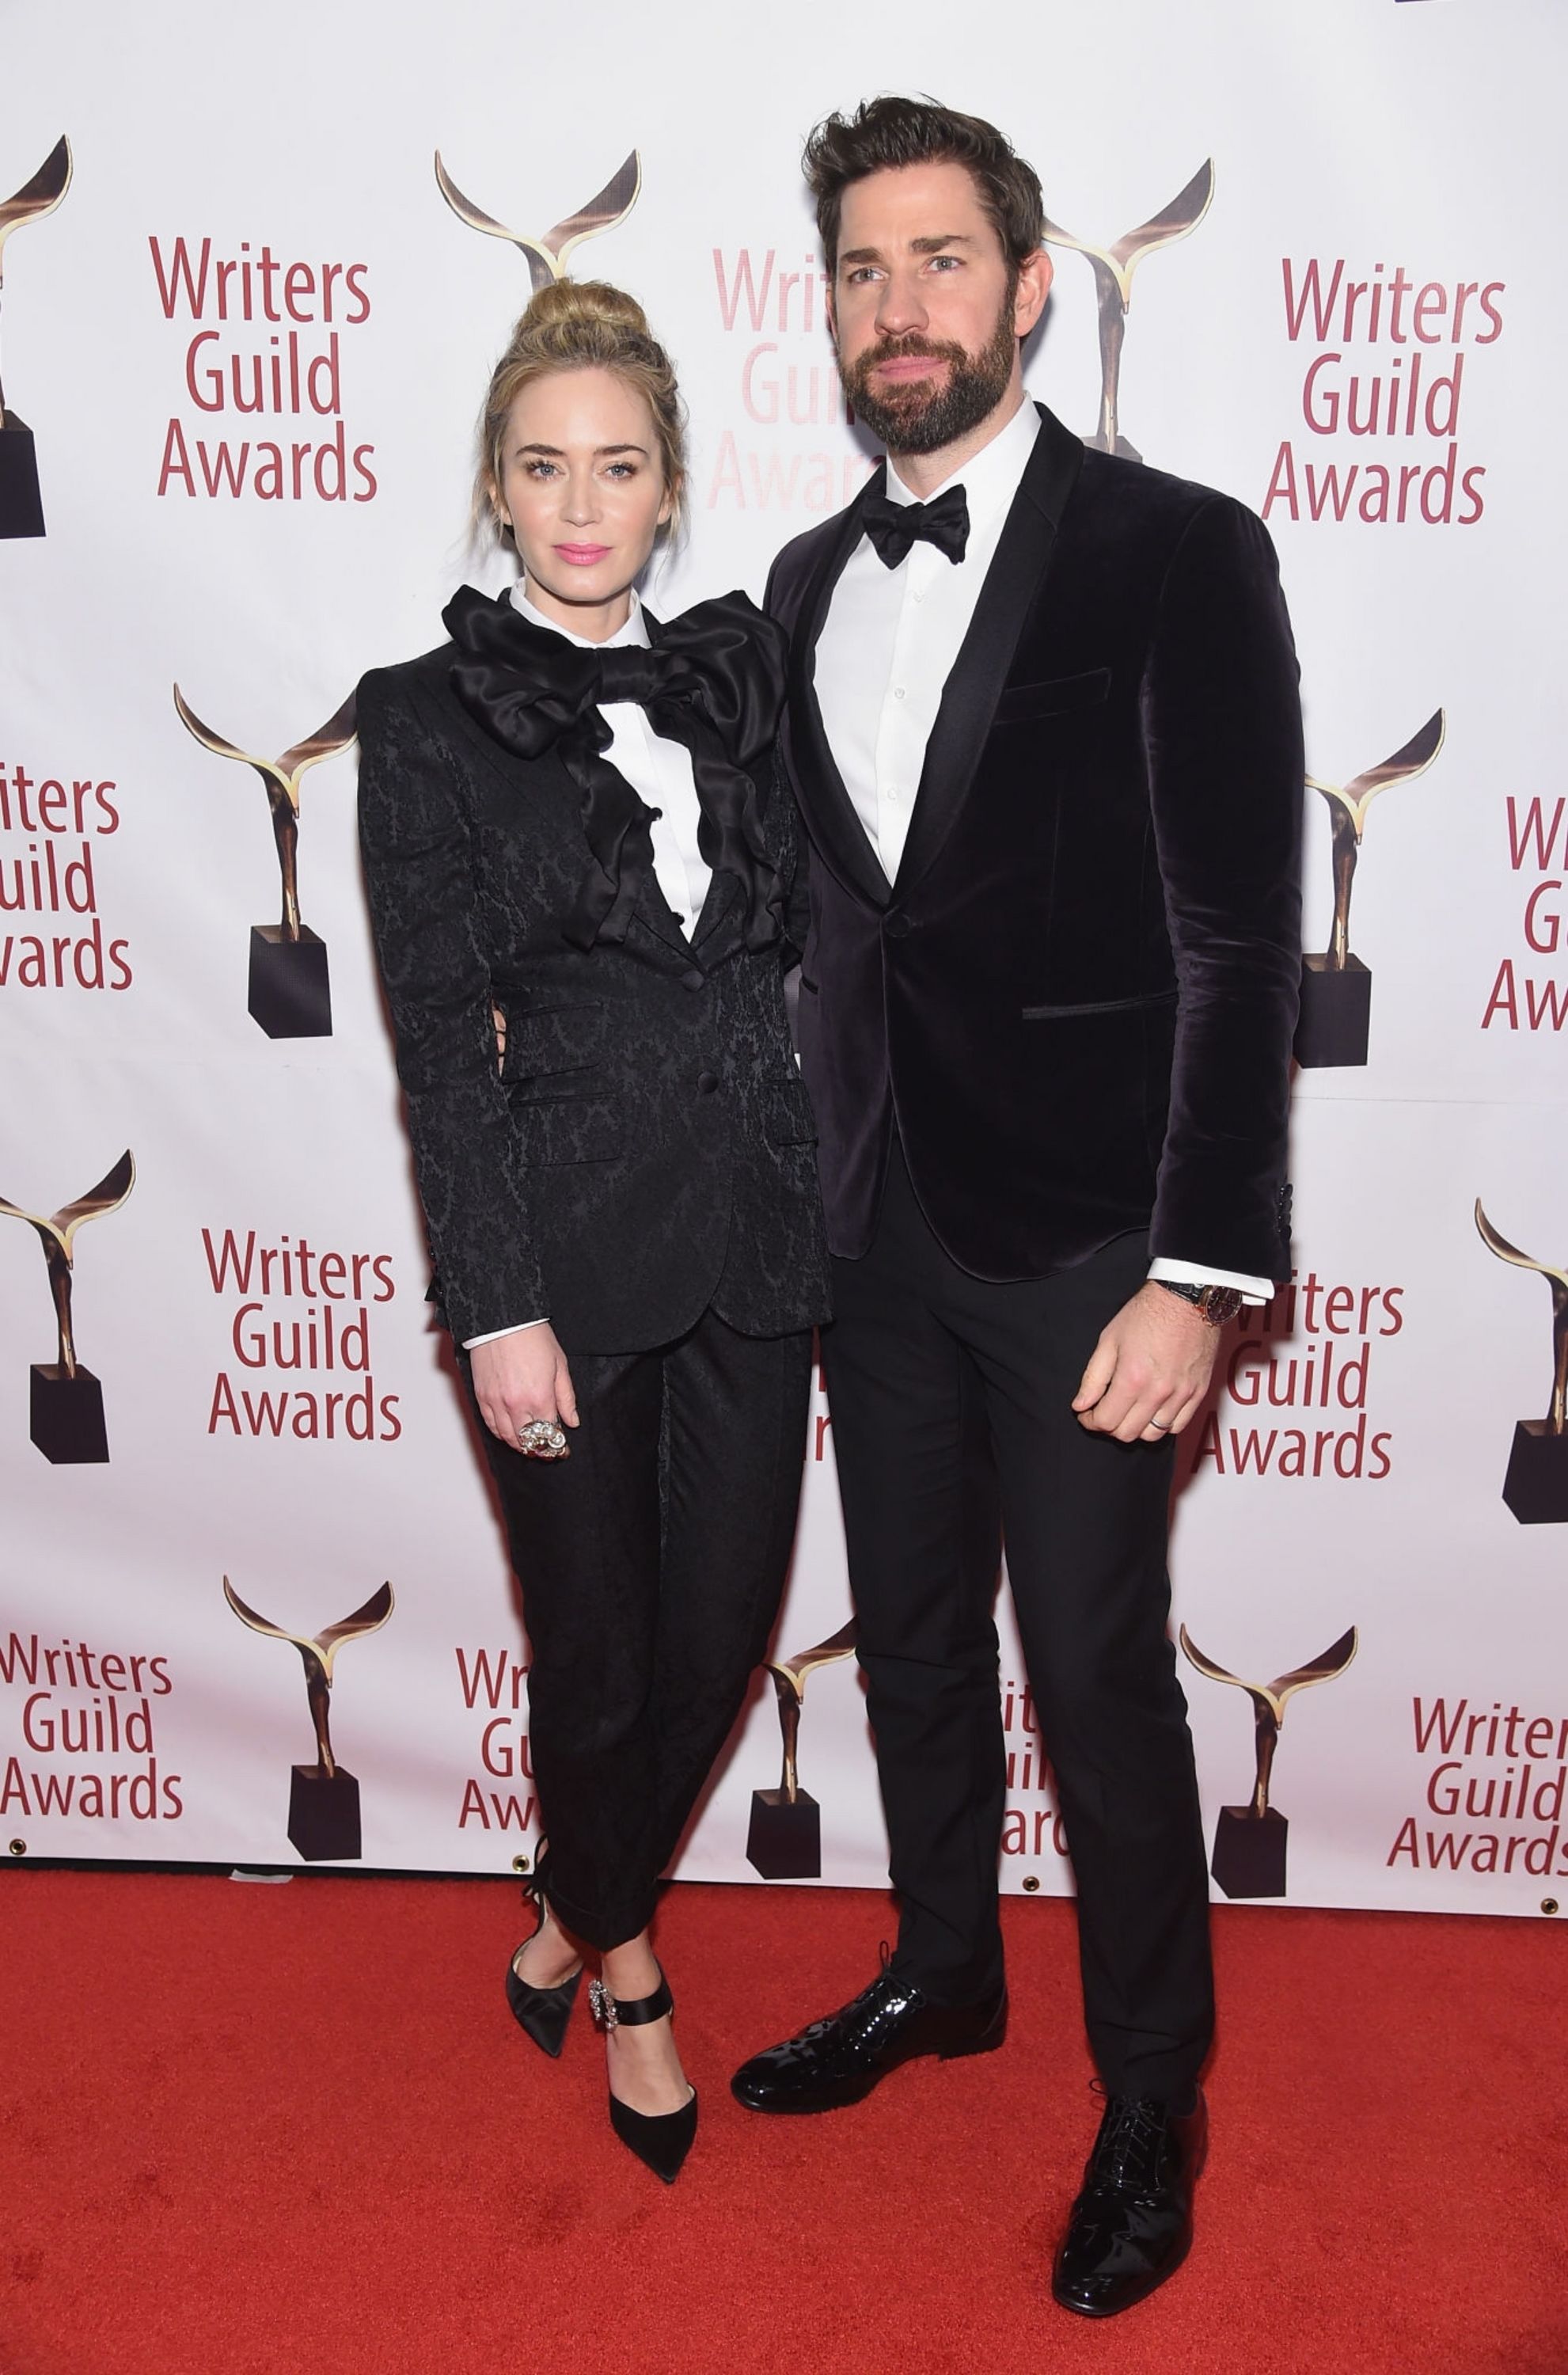 2019-02-17-71st-Annual-Writers-Guild-Awards-017.jpg